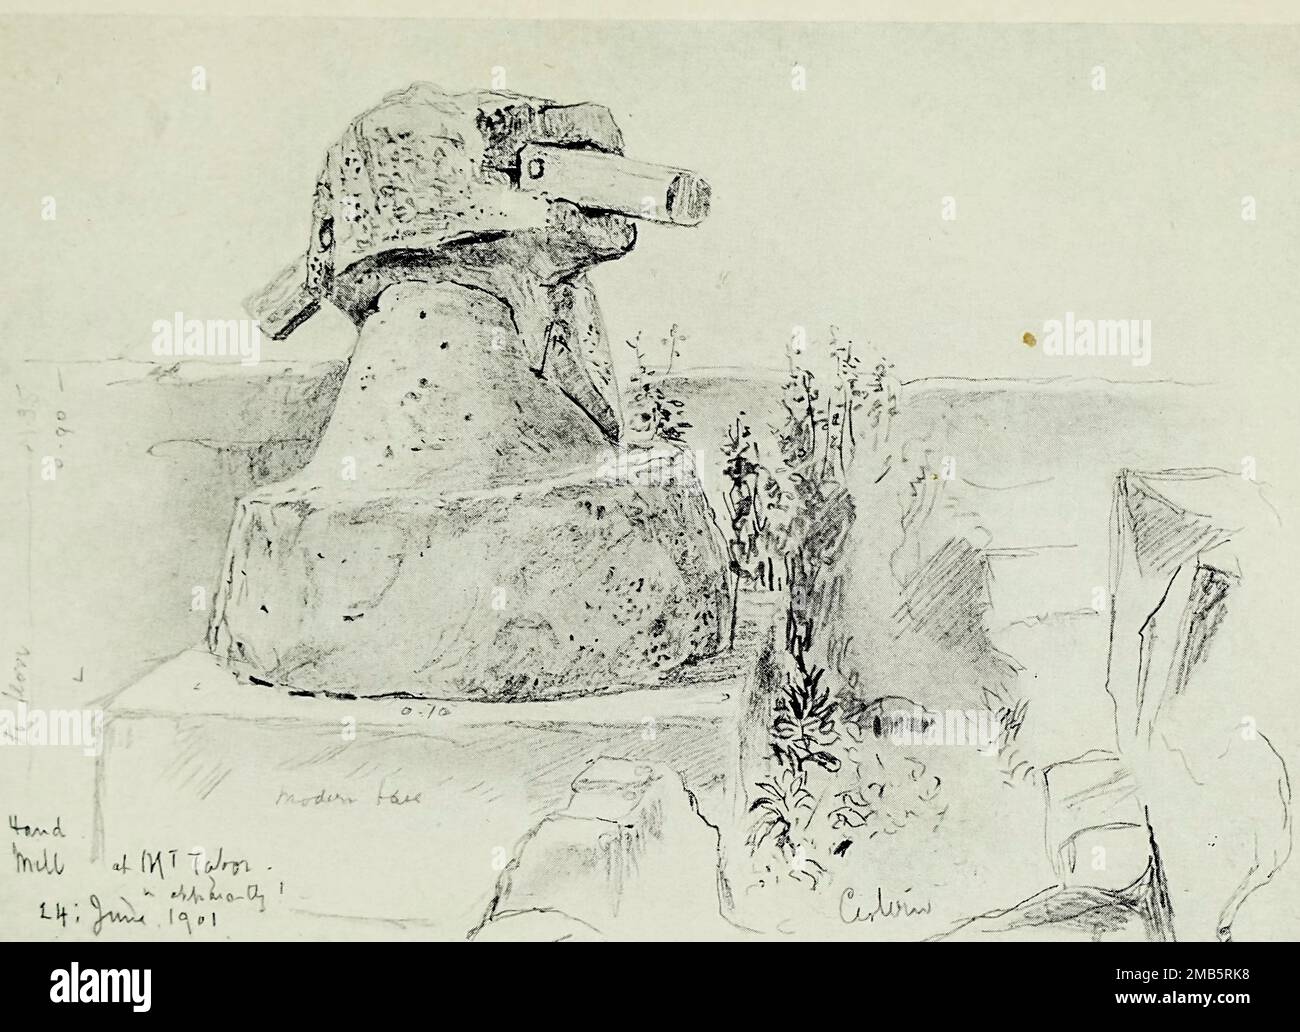 Ancient Hand-Mill at Mount Tabor Sketched by John Fulleylove from the book ' The Holy land ' Described by John Kelman 1864-1929 Publication date 1902 Publisher London : A. & C. Black Stock Photo